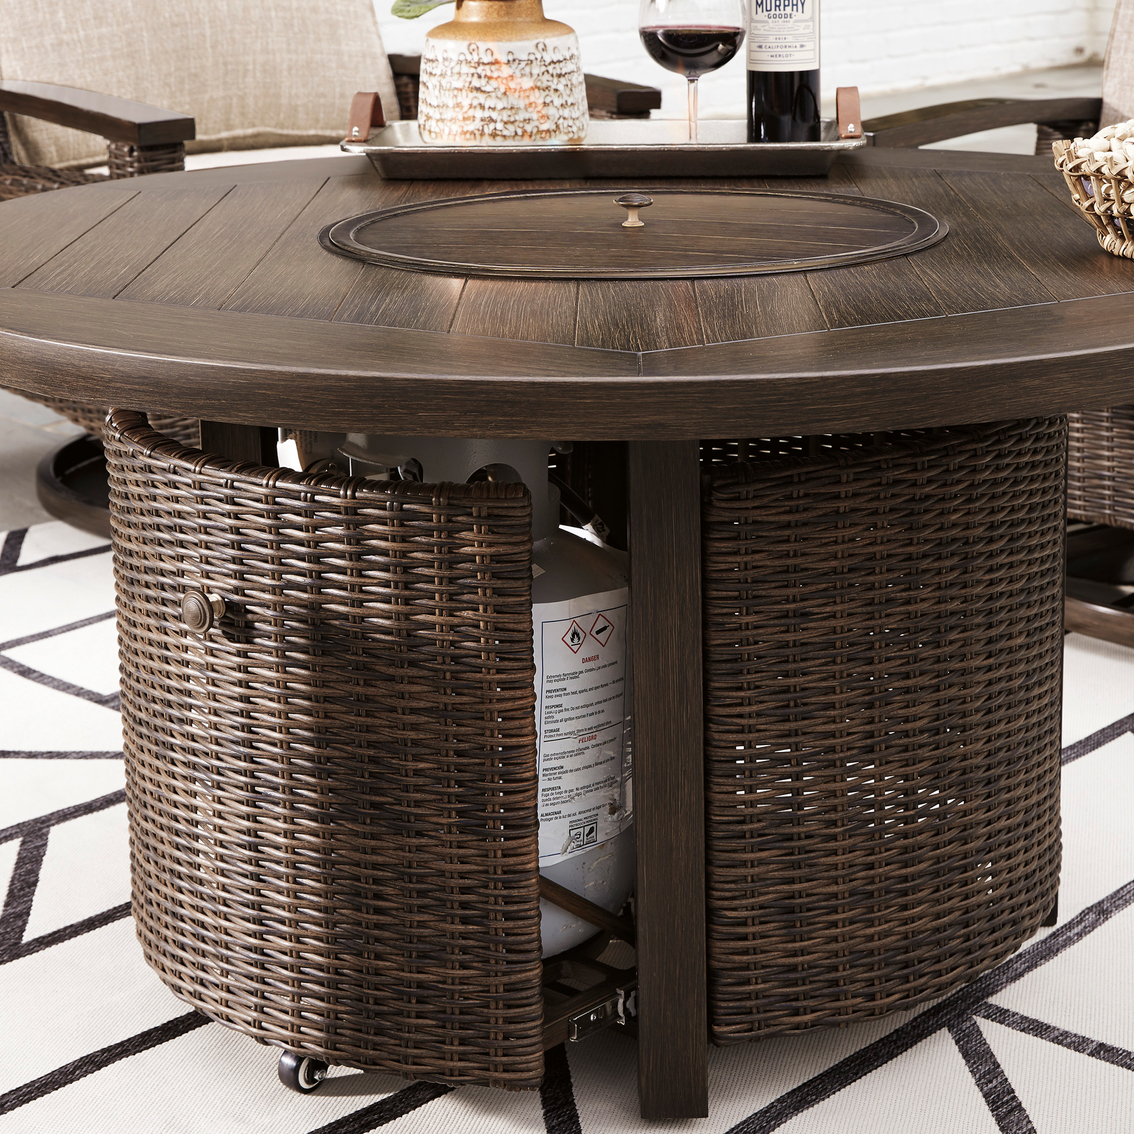 Signature Design by Ashley Paradise Trail Fire Pit Table with 4 Swivel Chairs - Image 4 of 6